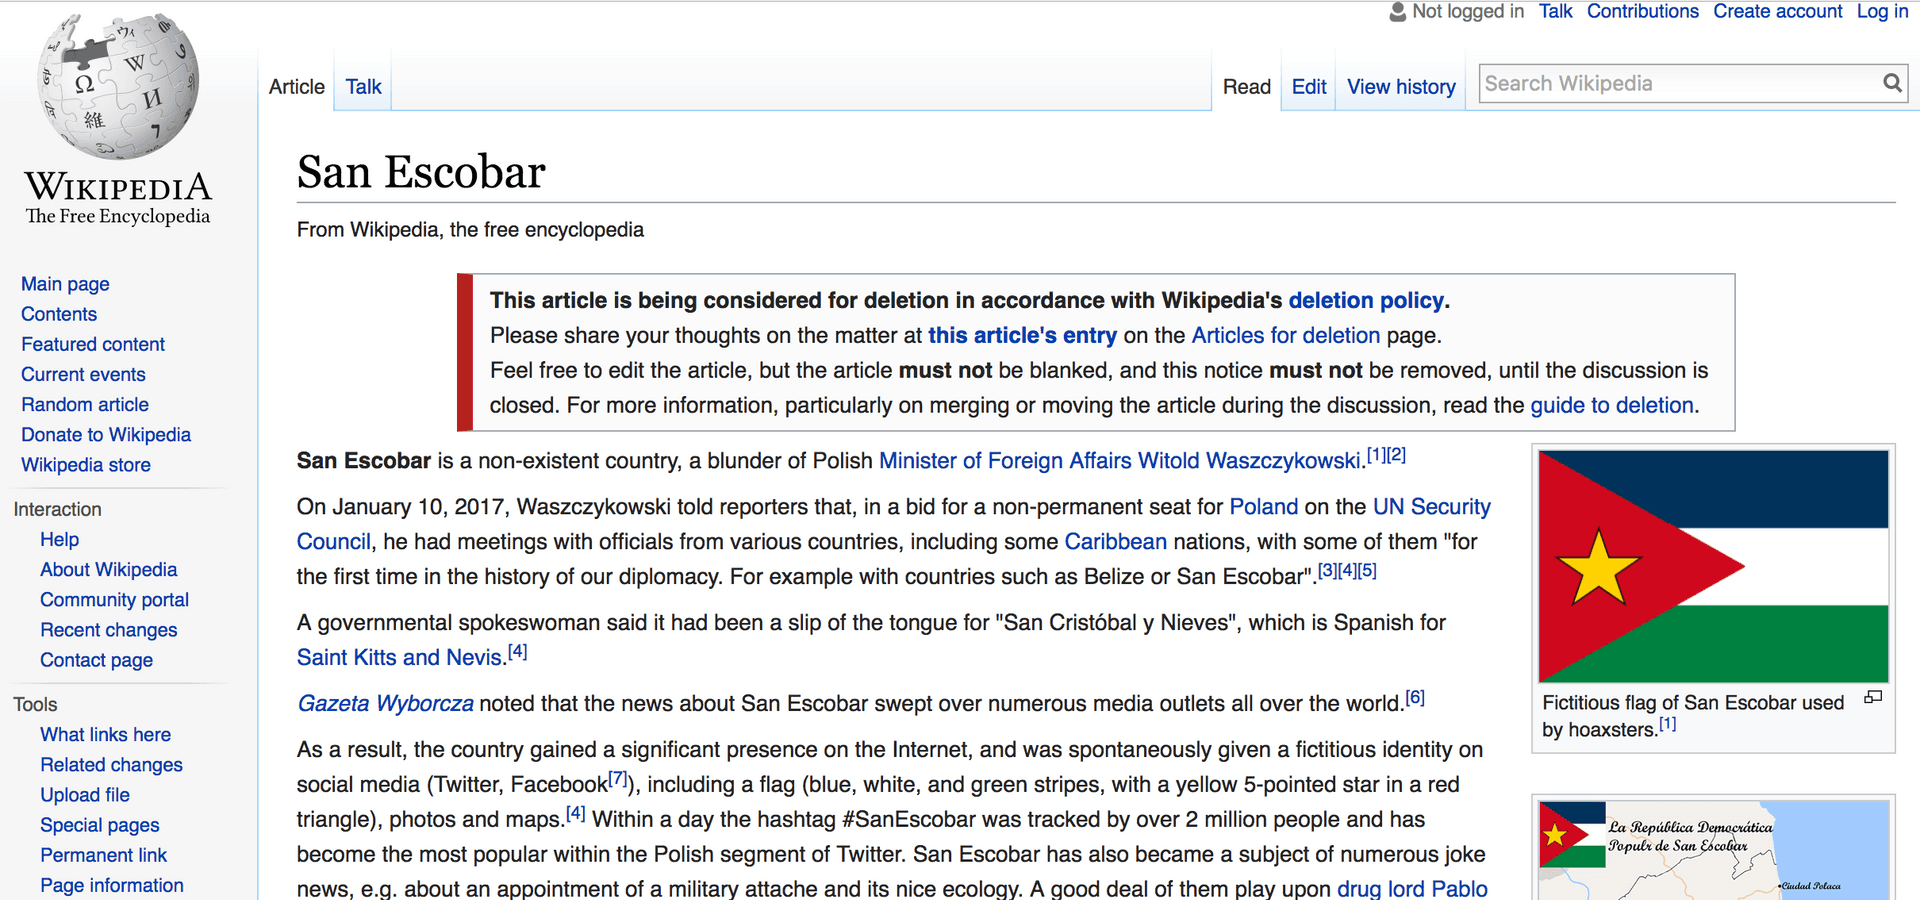 User-created online encyclopedia entries at Wikipedia now include the story of San Escobar.